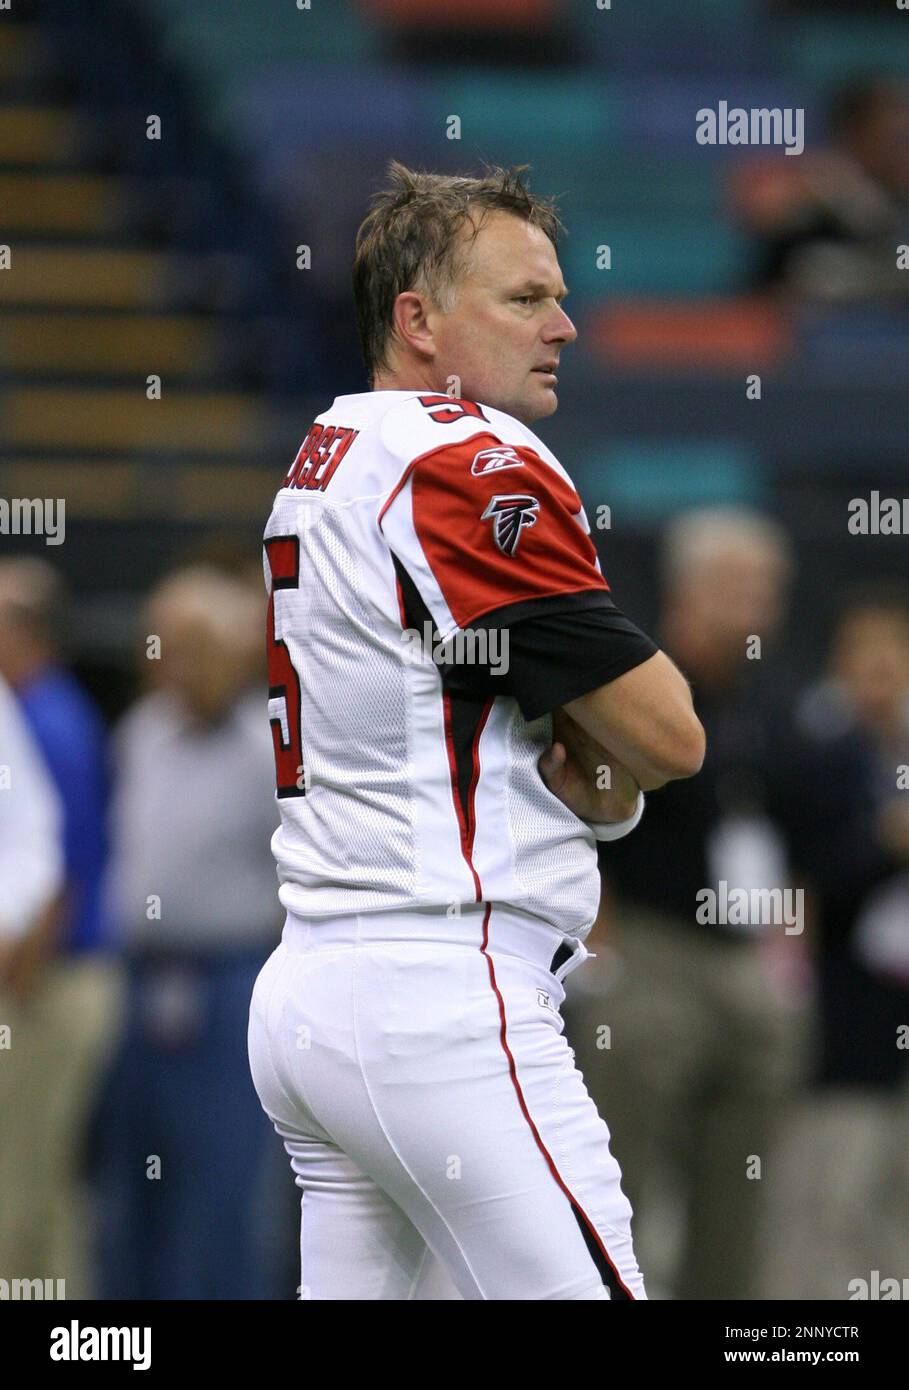 2007 October, 21: Falcons kicker Morten Andersen (5) prior to kickoff of a  22-16 win by the New Orleans Saints over the Atlanta Falcons at the  Louisiana Superdome in New Orleans, LA. (